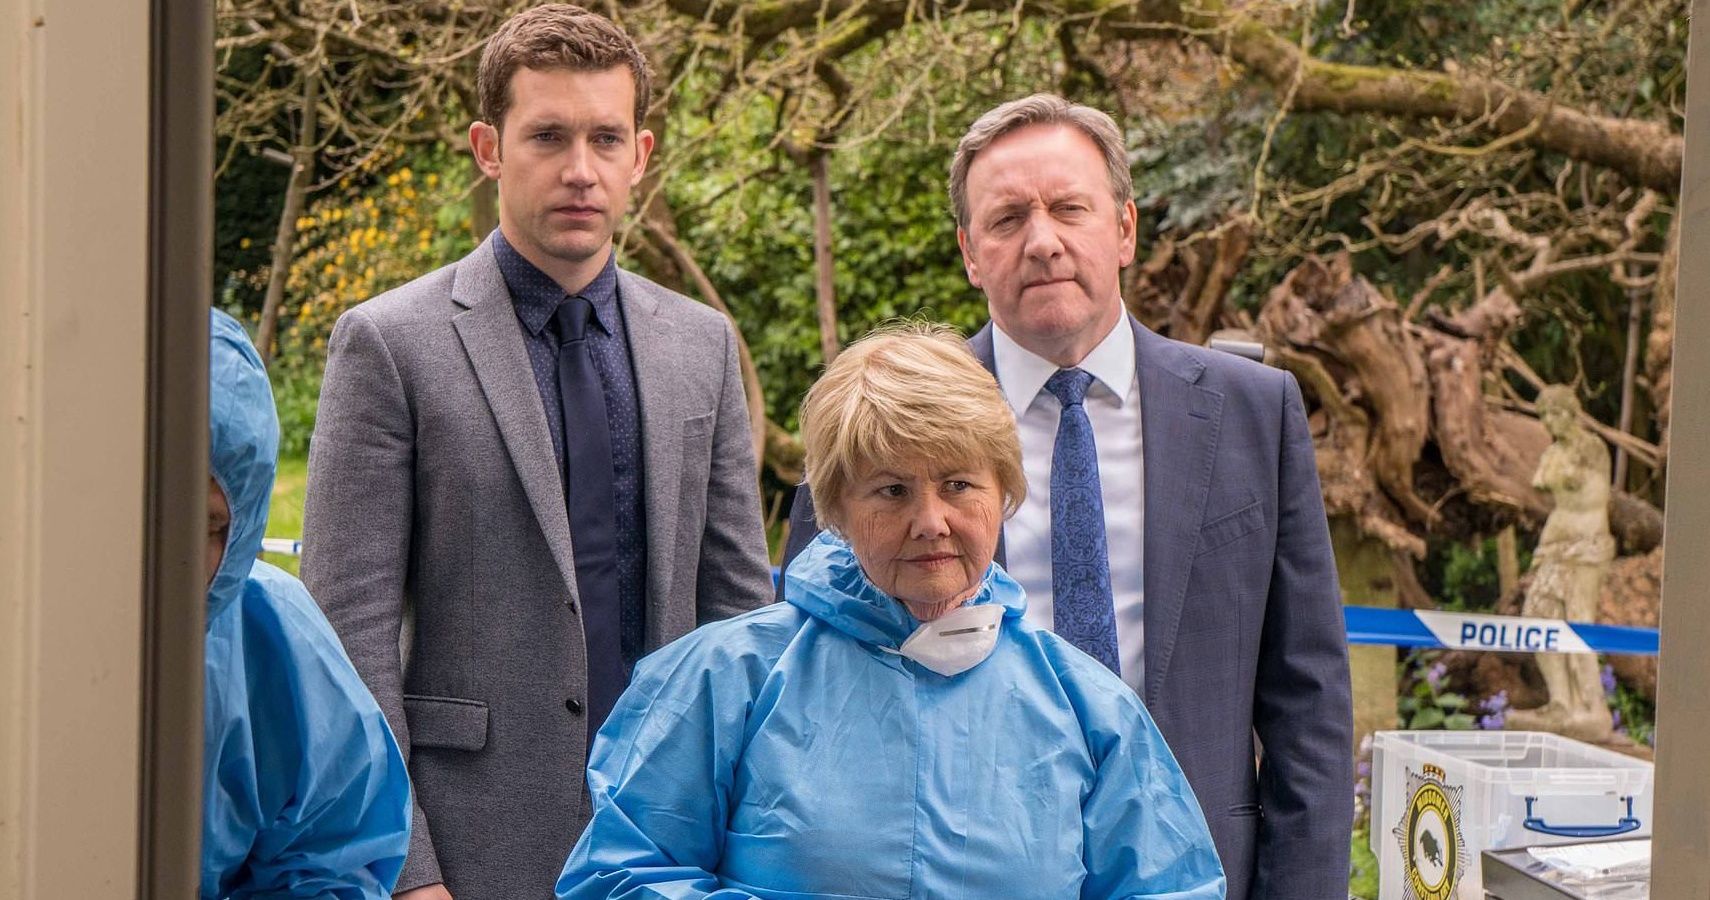 Who Stars In Midsomer Murders In 2020 Series 20 Cast And Guest Stars Riset